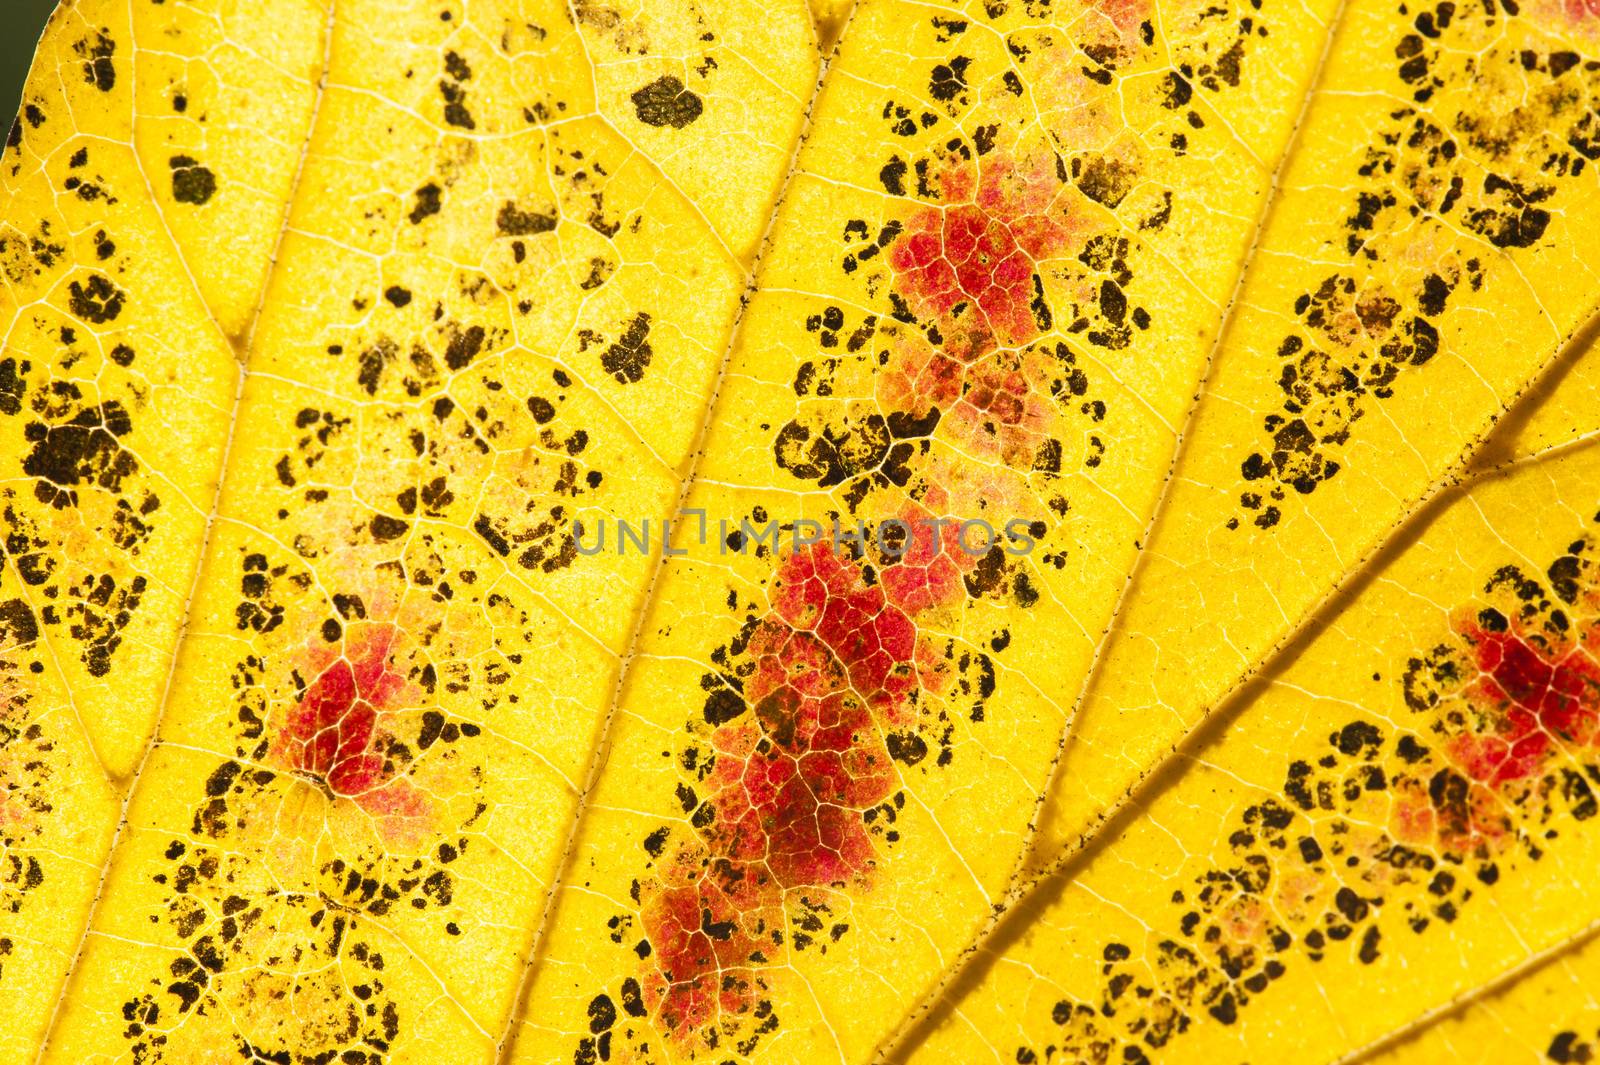 Parrotia persica tree in autumn, commonly called Persian ironwood, deciduous tree in the family Hamamelidaceae